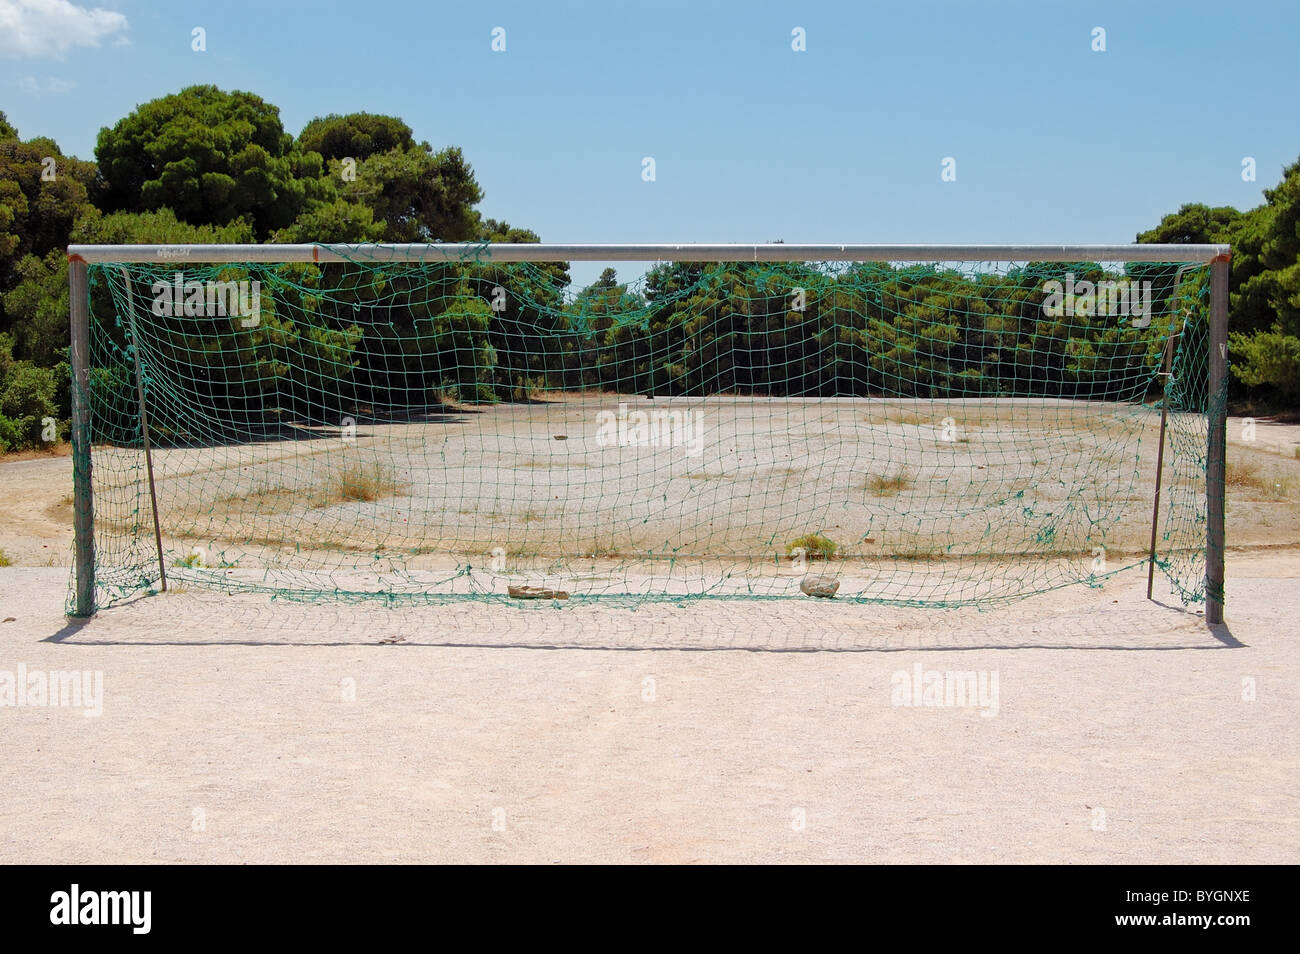 Empty soccer goalpost pitch and net in a park. Stock Photo